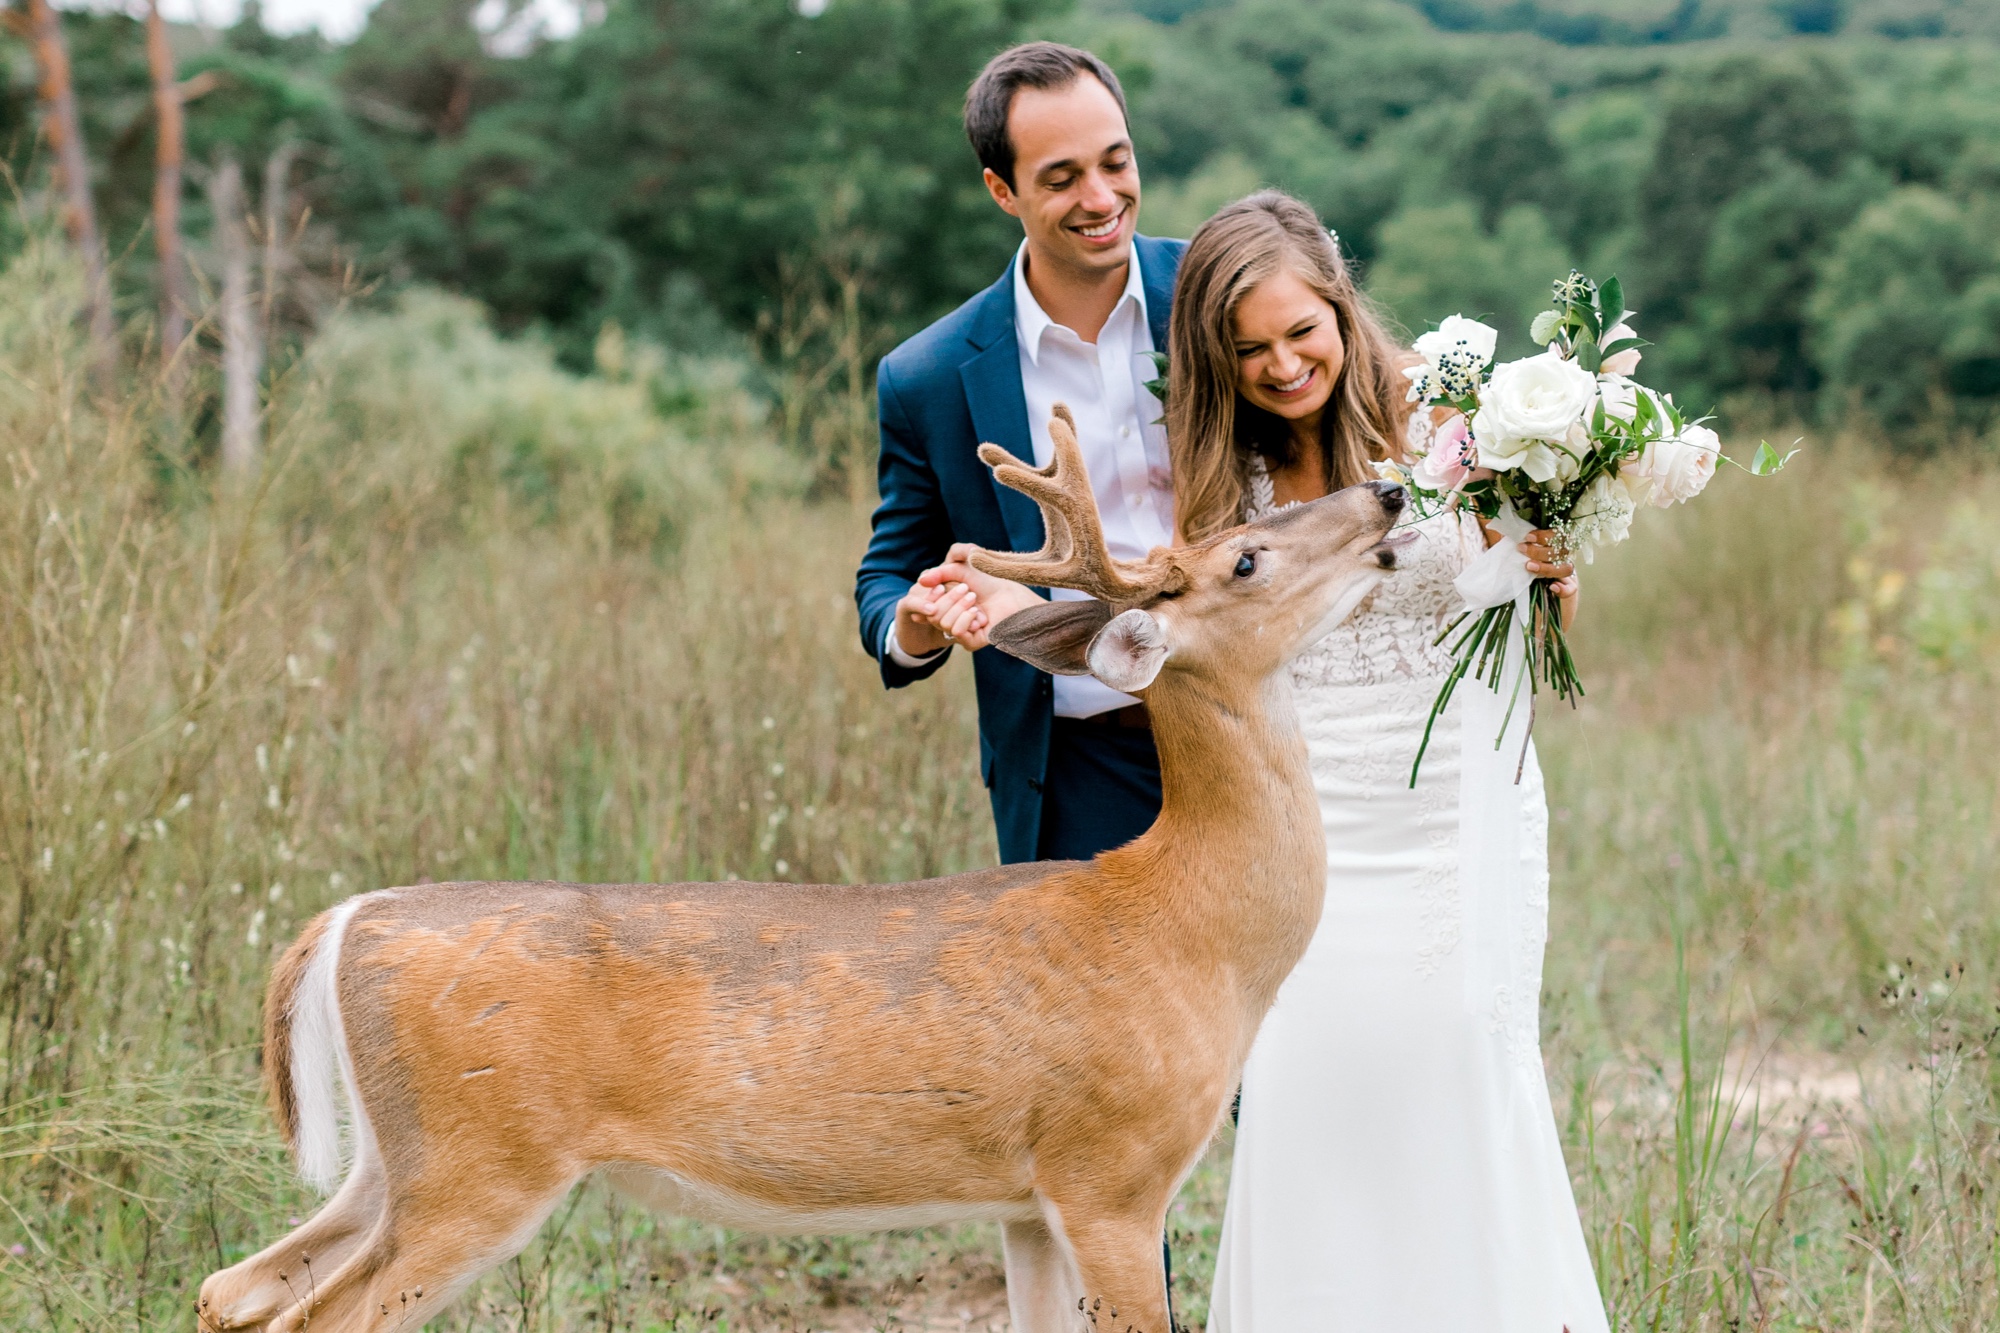 A bride and a groom holding a boutique as a deer surprises them.